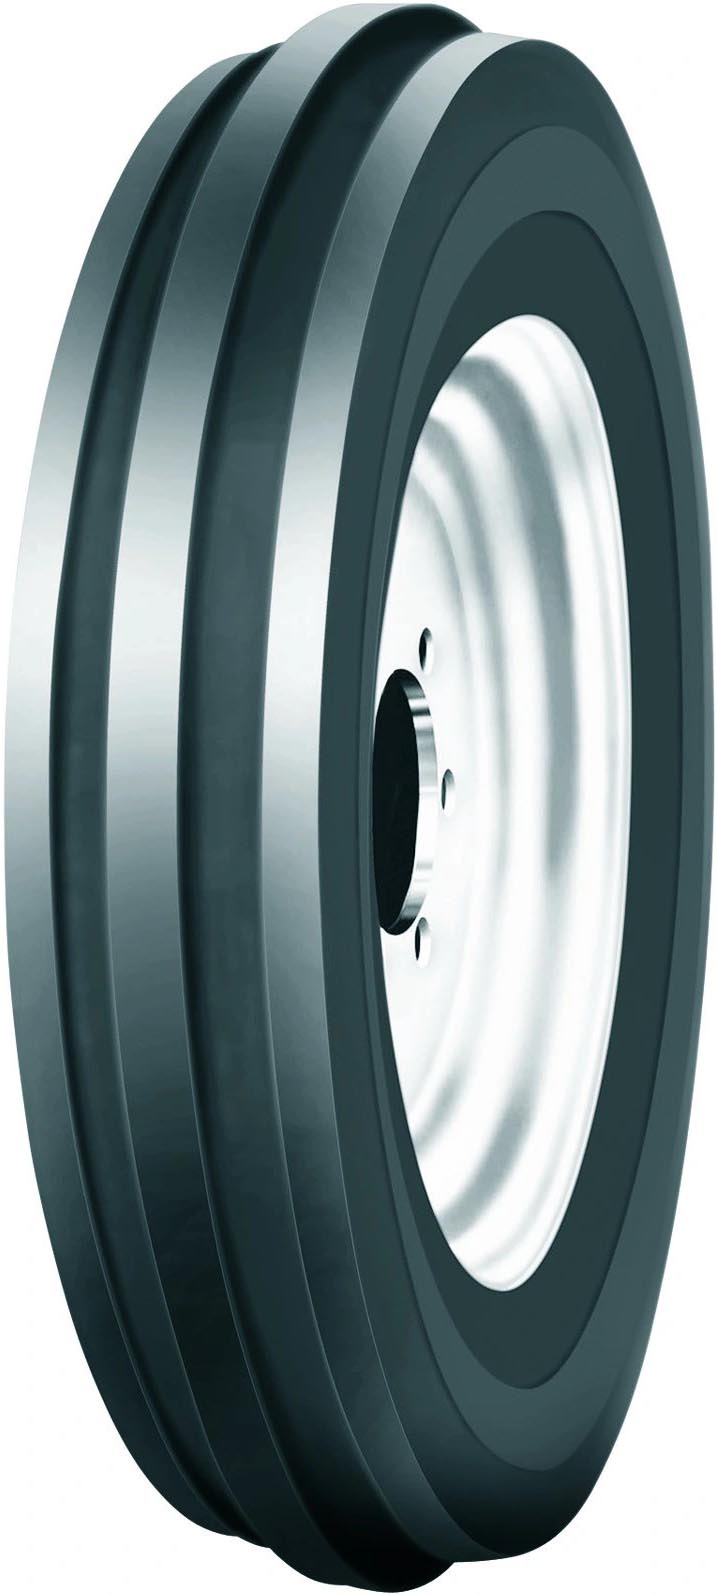 product_type-industrial_tires CULTOR AS-Front 10 8PR TT 7.5 R16 P